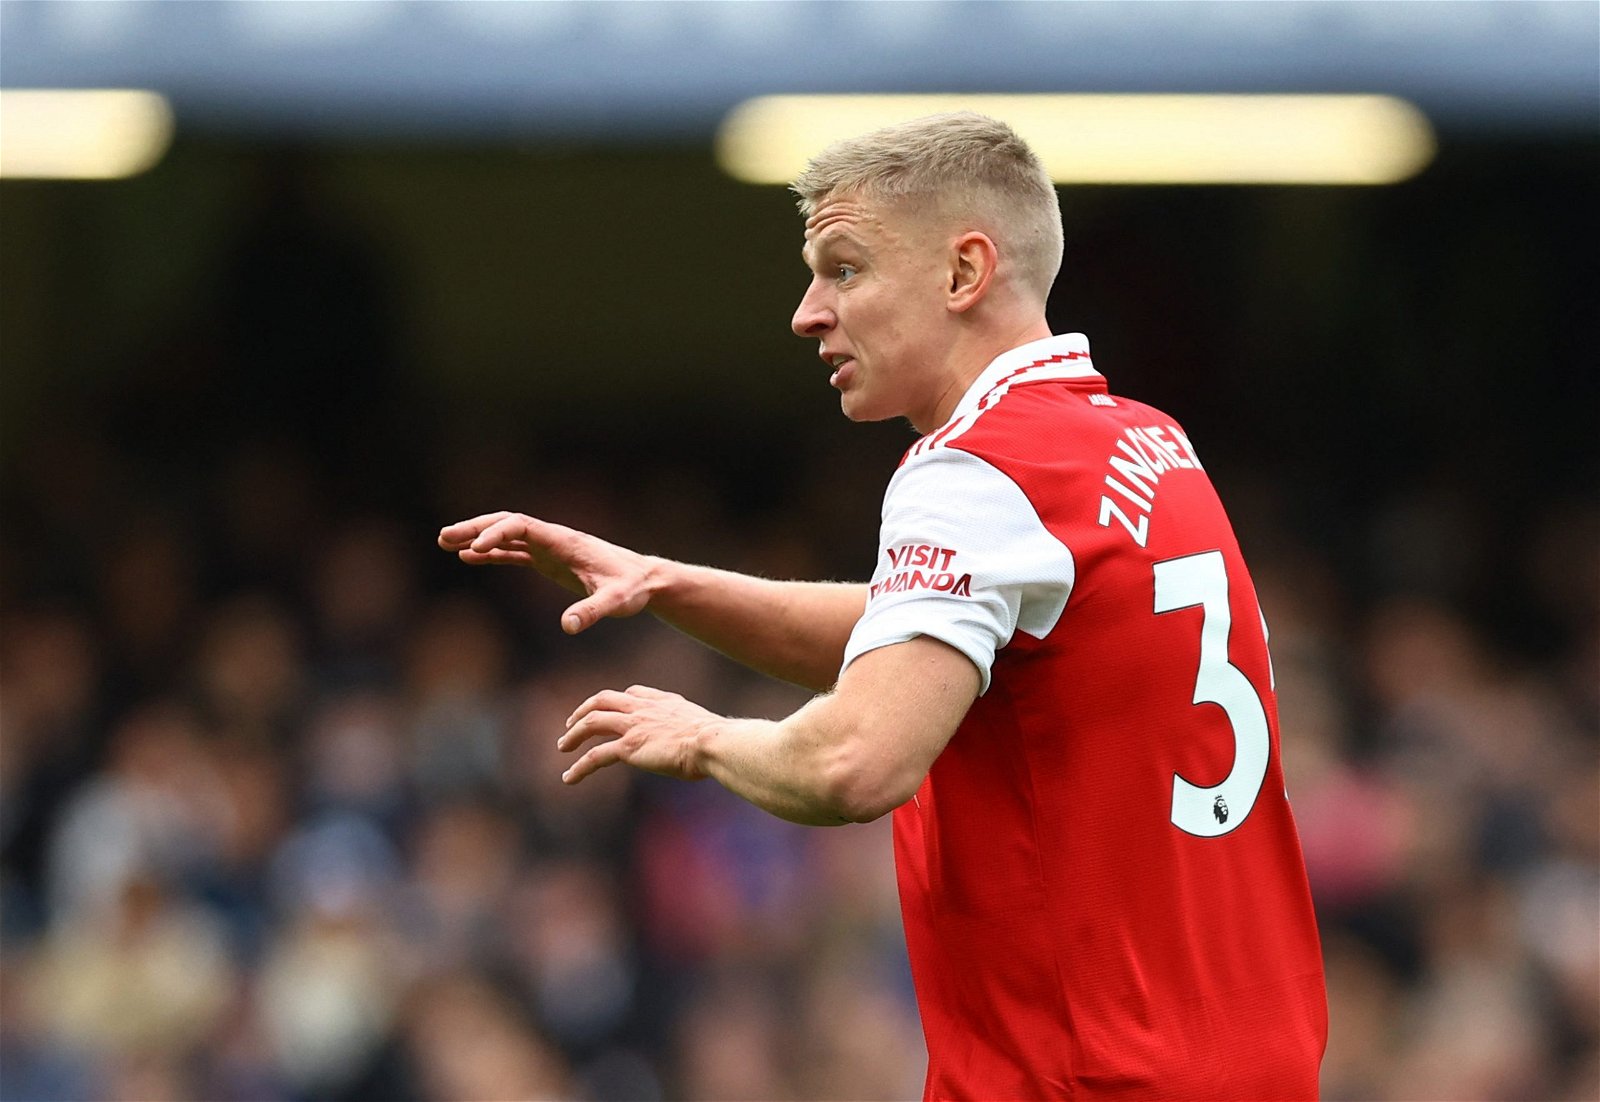 'Arsenal's big bargain', 'Leader': Hargreaves shares what he noticed about Oleksandr Zinchenko before Arsenal win